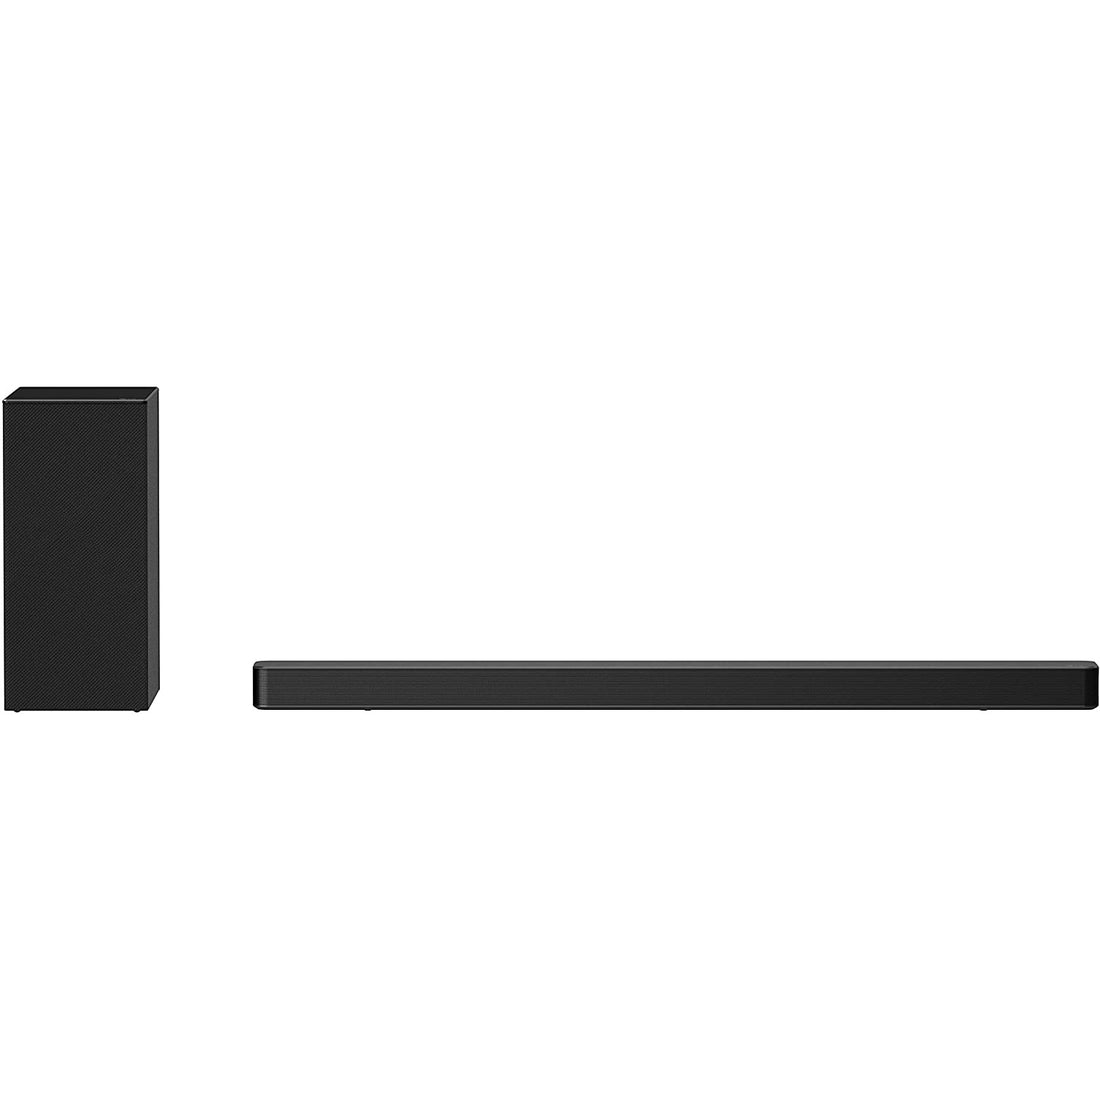 LG 3.1-Channel 420W Soundbar with Wireless Subwoofer and DTS Virtual:X - Black (Refurbished)